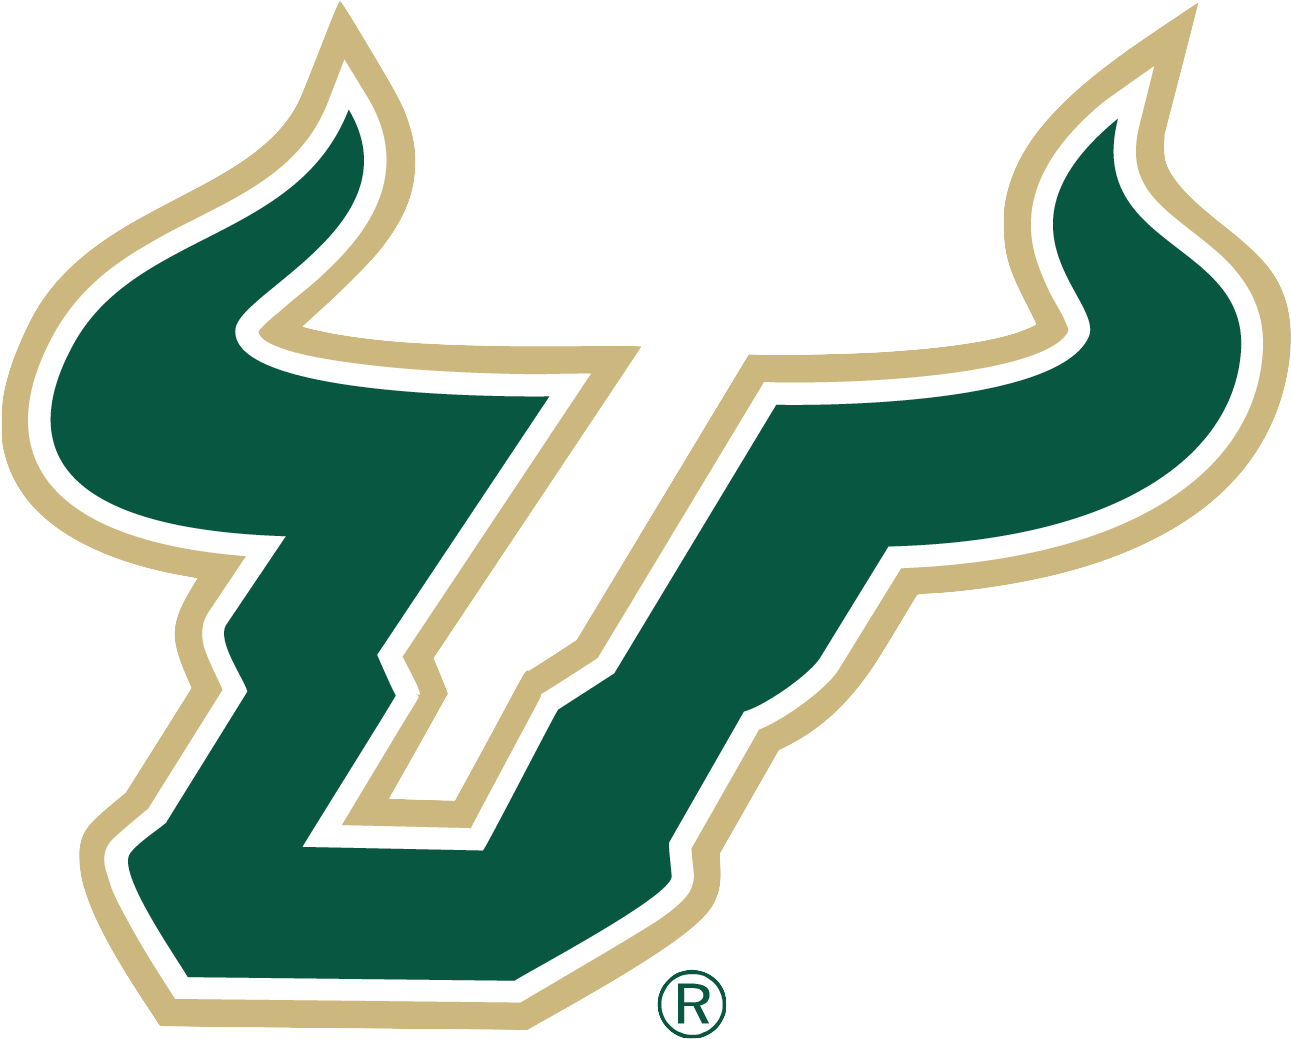 As A Sports Program, Their Marching Band Is Good, They - University Of South Florida (1380x1100)